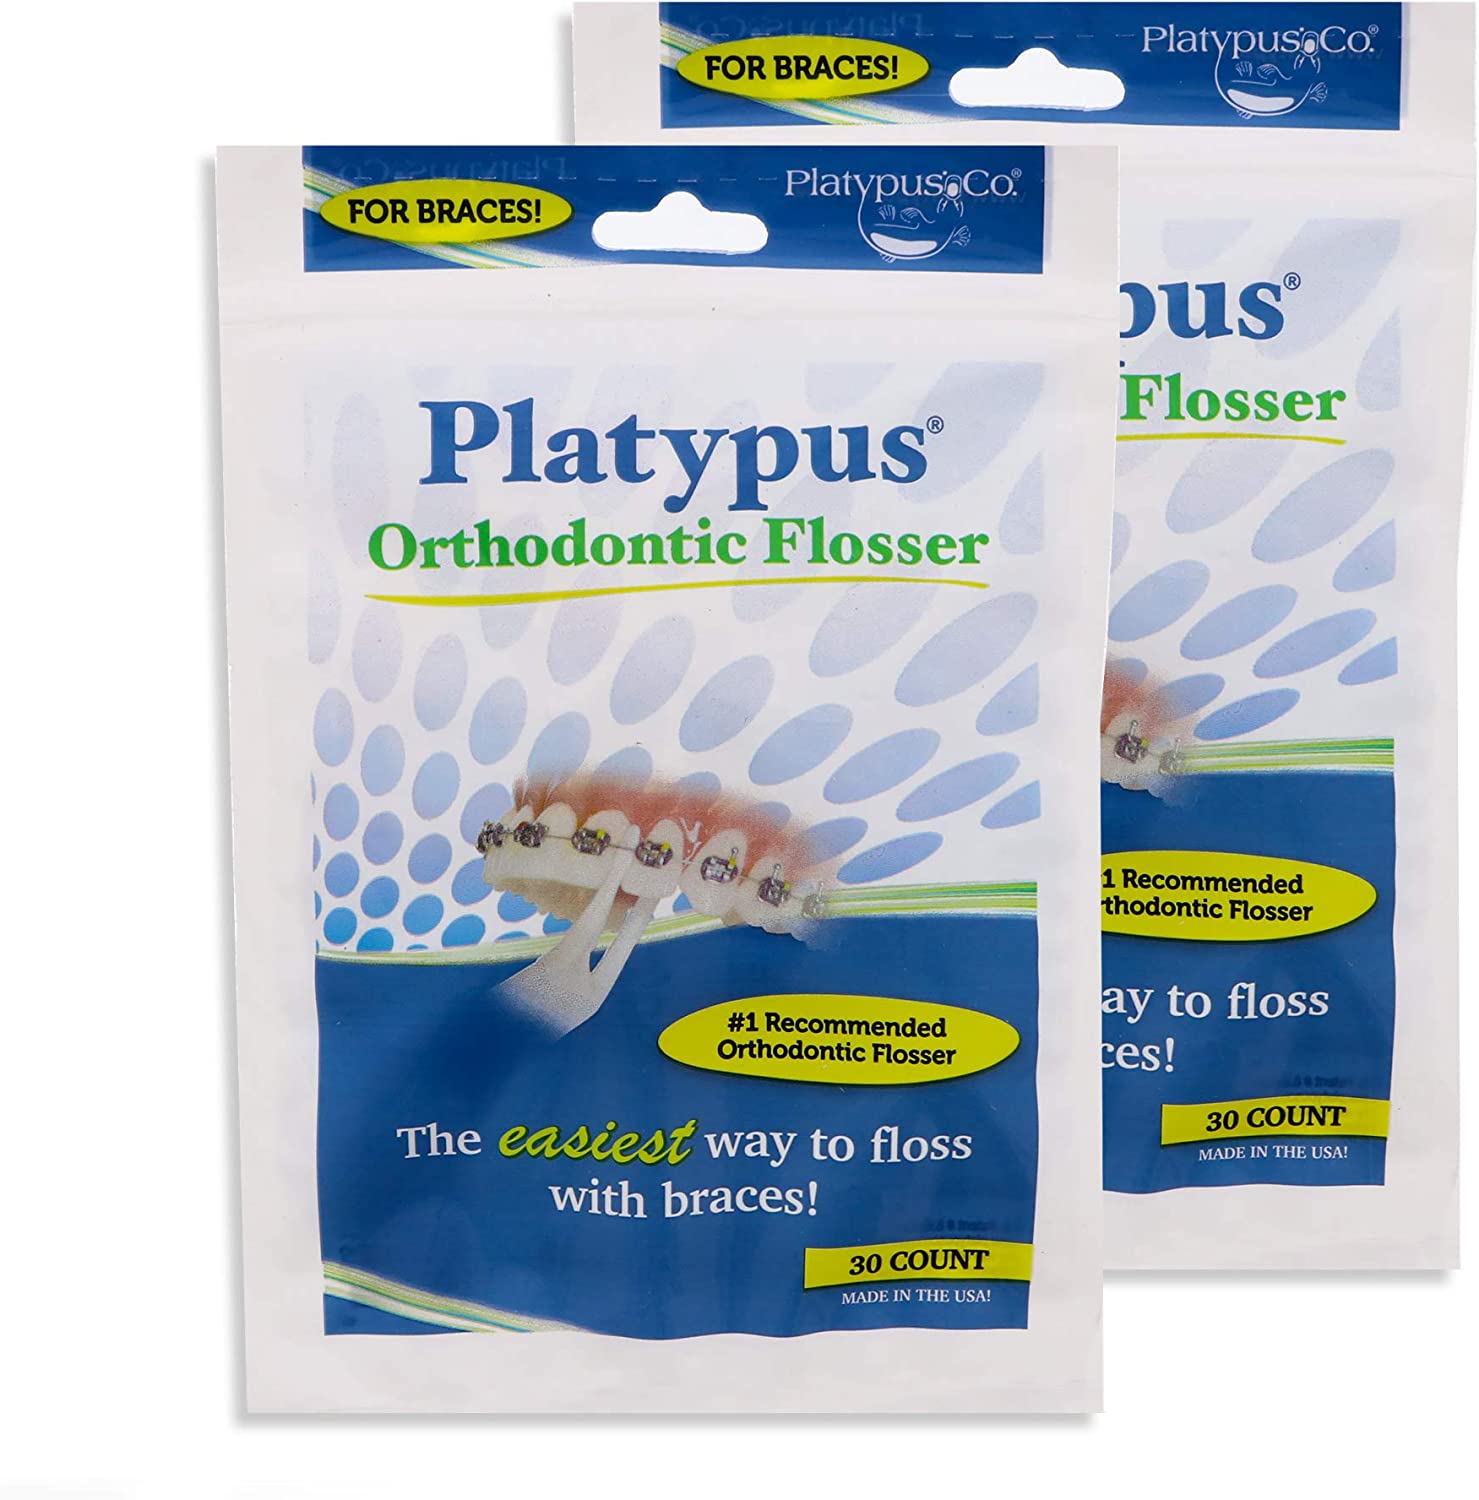 Platypus Orthodontic Flossers for Braces - Dental Floss Picks for Braces, Fits Under Arch Wire, Will Not Damage Braces, Increase Flossing Compliance, Floss Teeth in Less Than Two Minutes - 30 Count